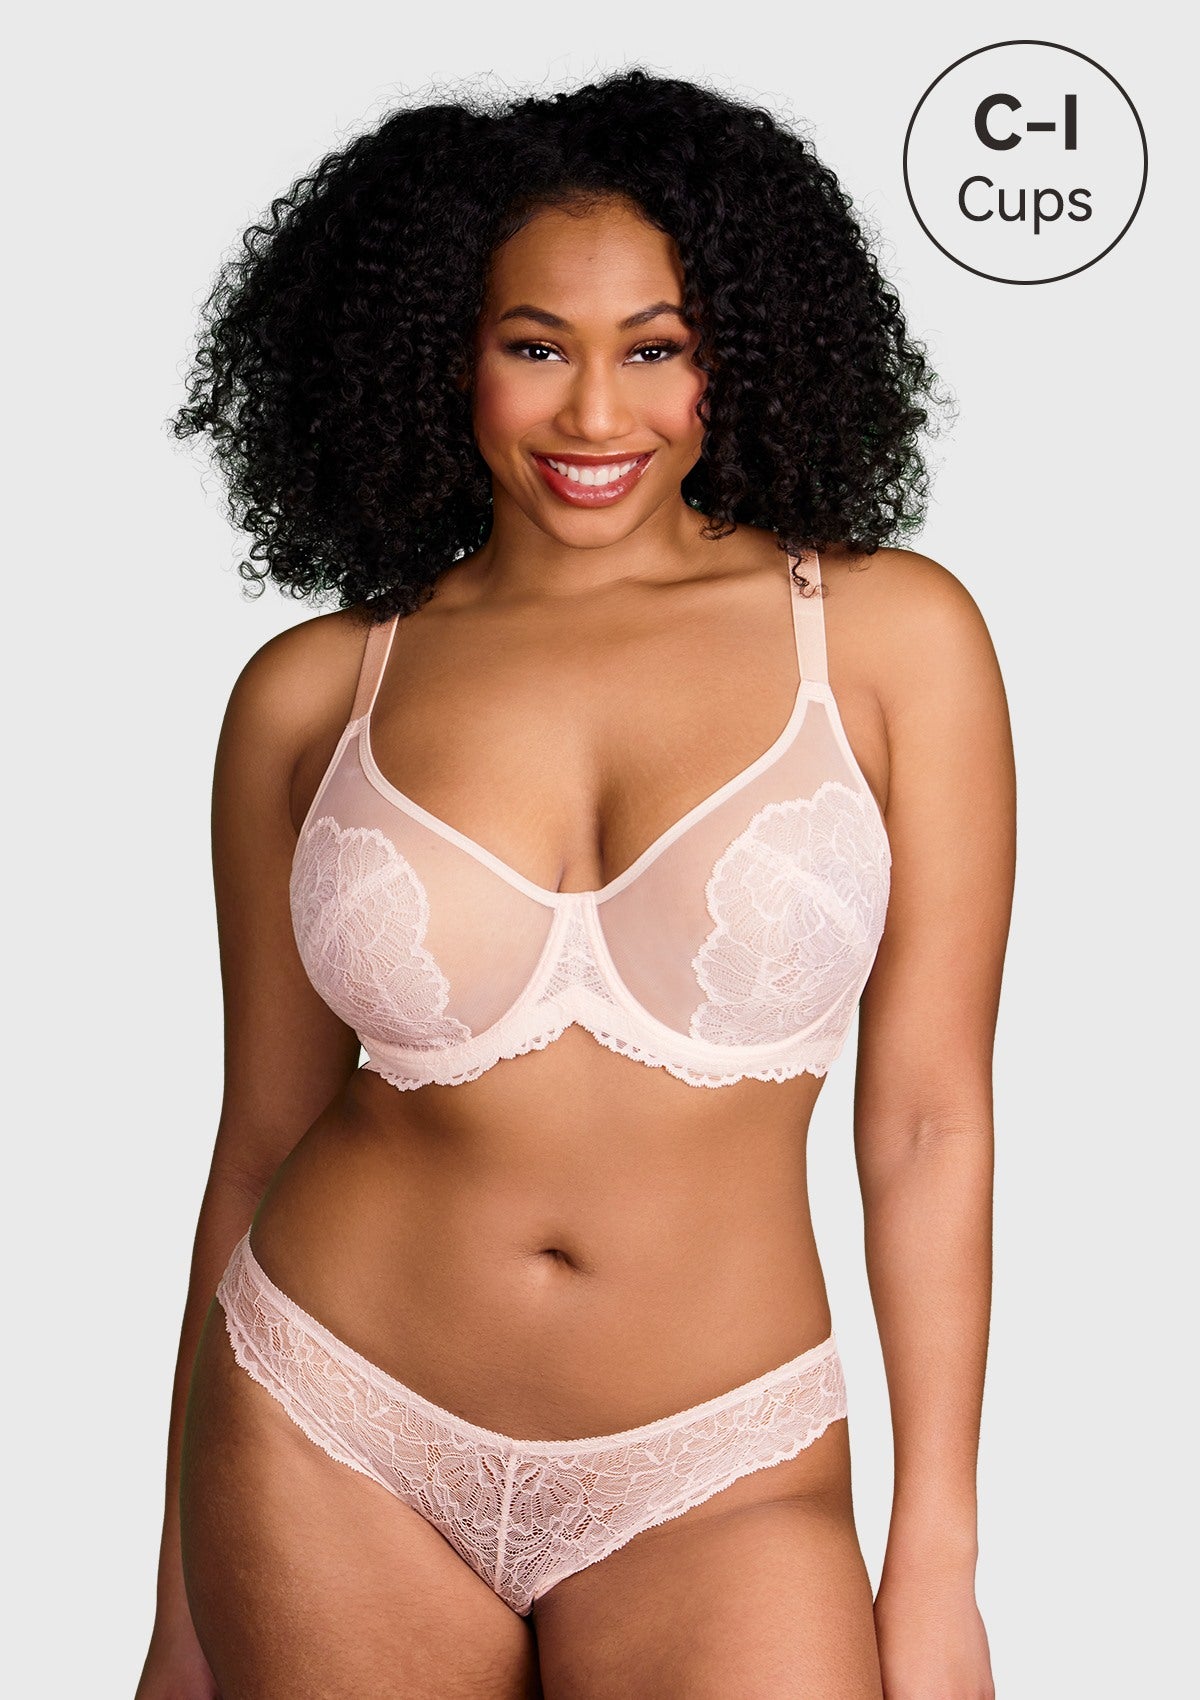 HSIA Blossom Sheer Lace Bra: Comfortable Underwire Bra For Big Busts - White / 44 / C